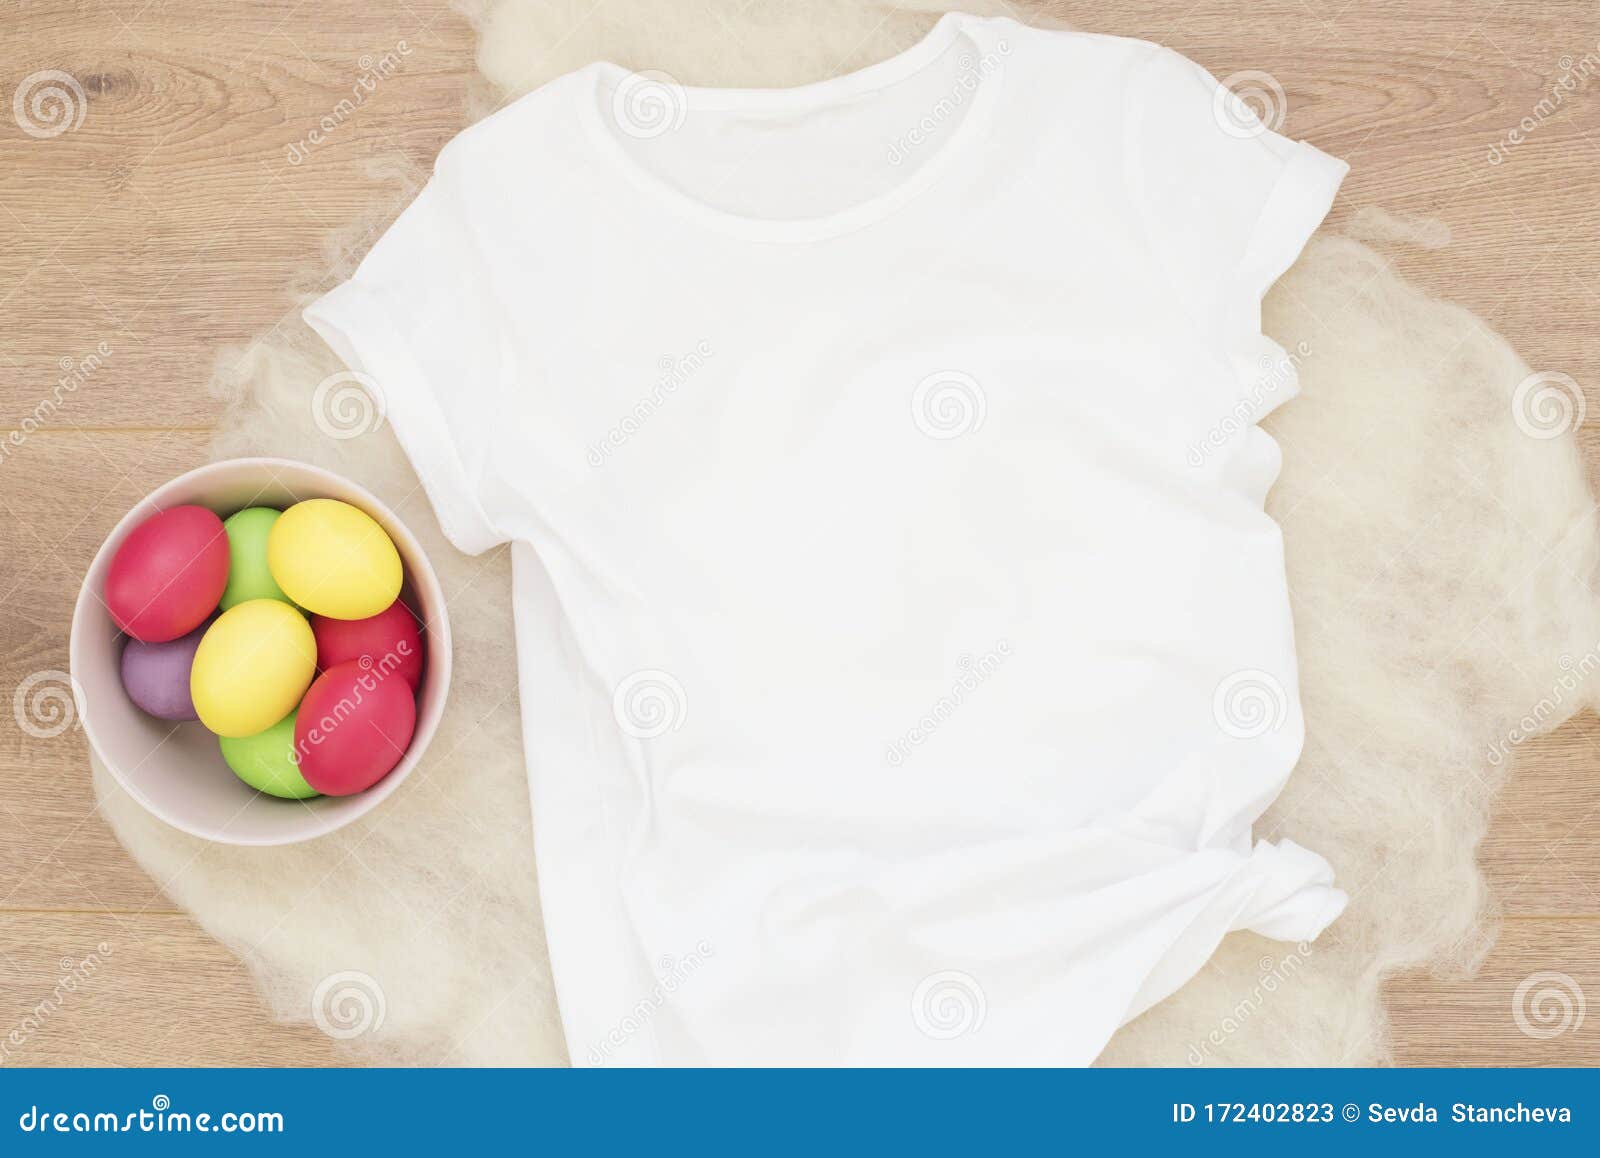 Download White Shirt Mockup Blank White T Shirt Mock Up Shirt Mockup Front View Painted Easter Eggs Ready To Replace Your Design Stock Image Image Of Background Shirt 172402823